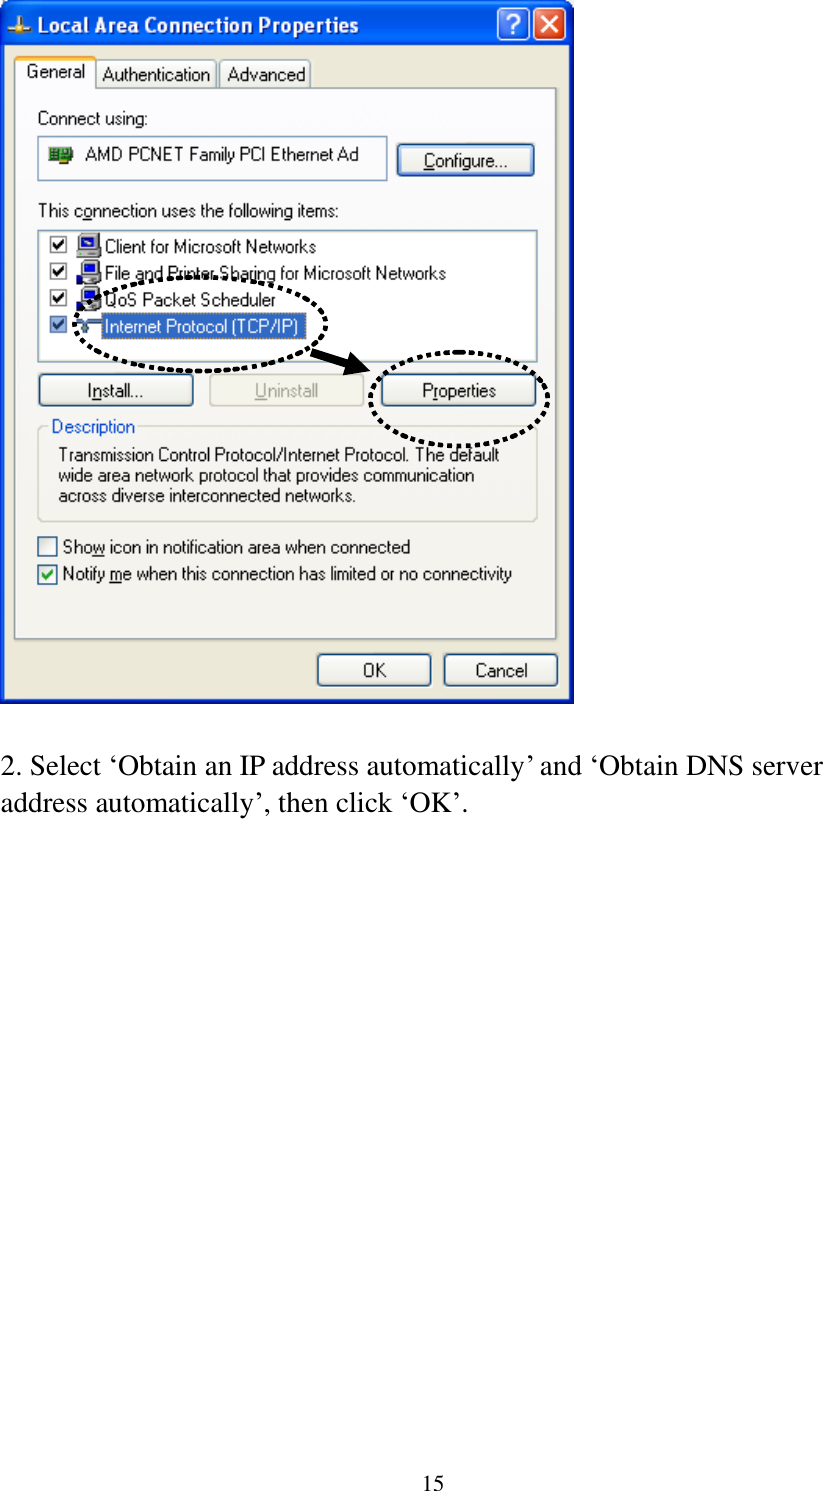 15   2. Select „Obtain an IP address automatically‟ and „Obtain DNS server address automatically‟, then click „OK‟. 